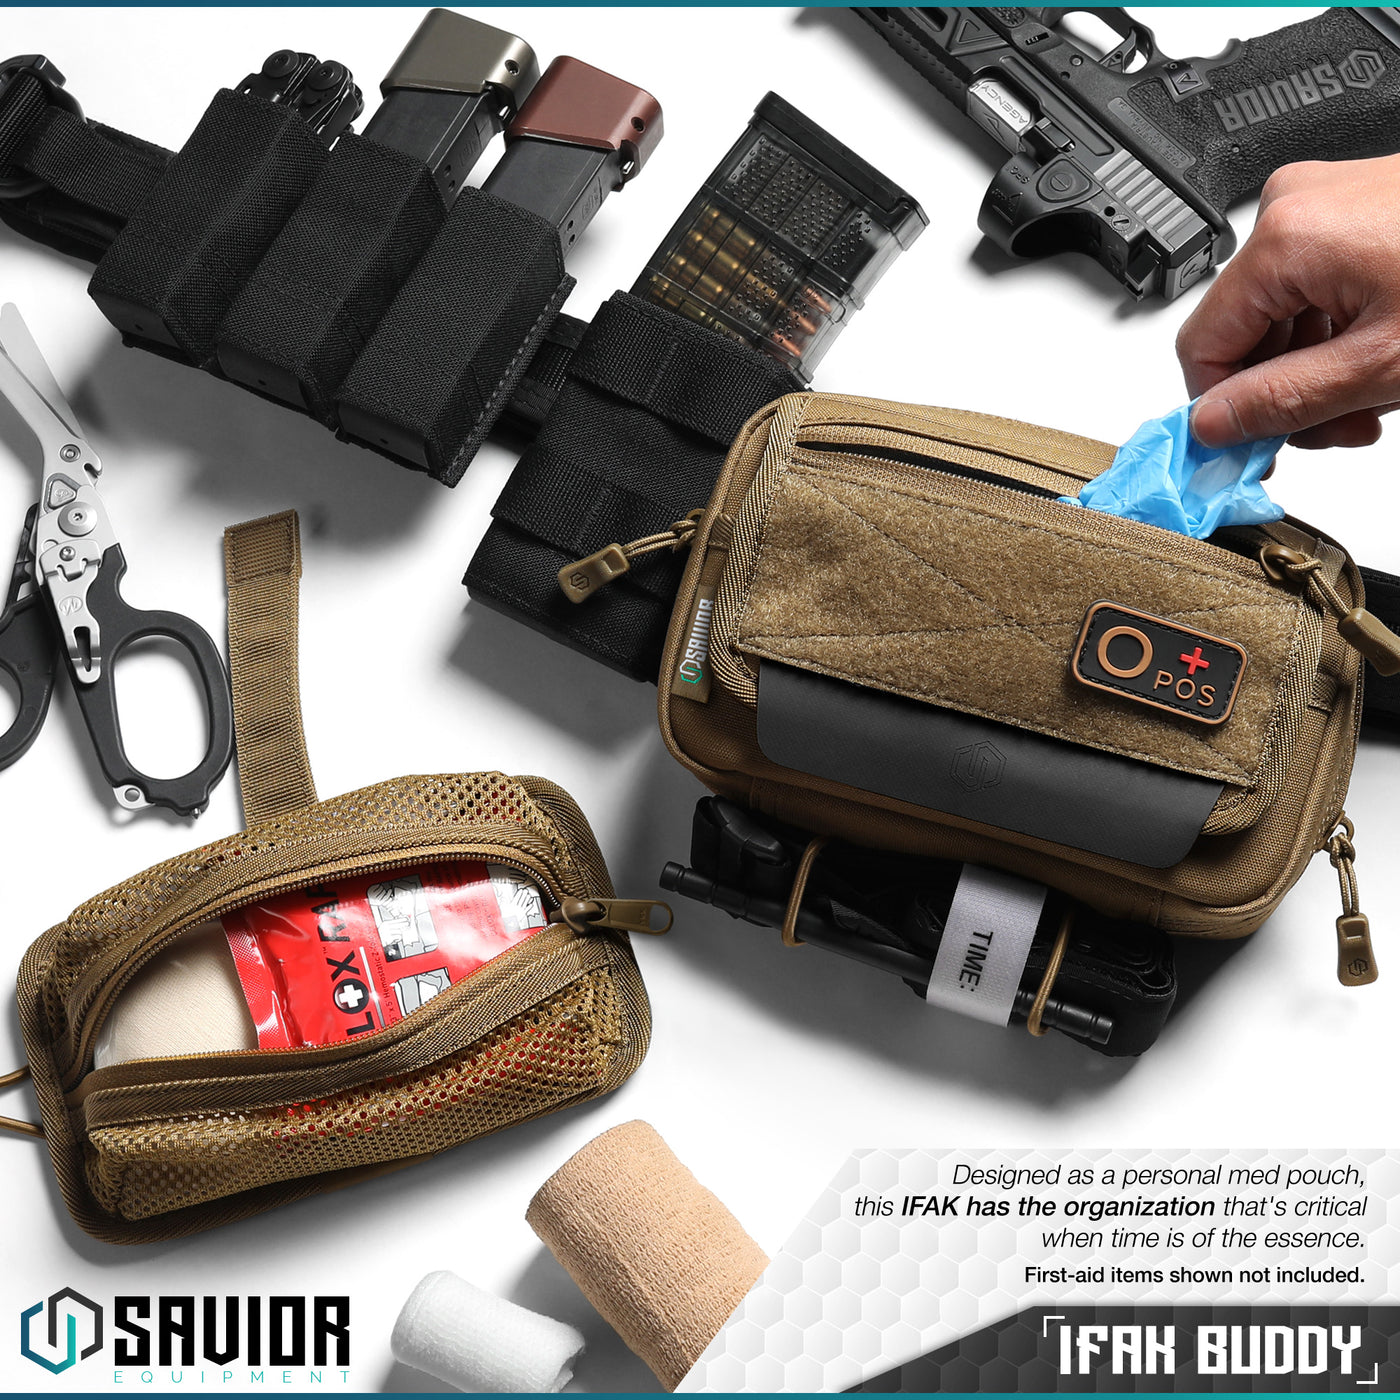 IFAK Buddy - Designed as a personal med pouch, this IFAK has the organization that’s critical when time is of the essence. First-aid items shown not included.